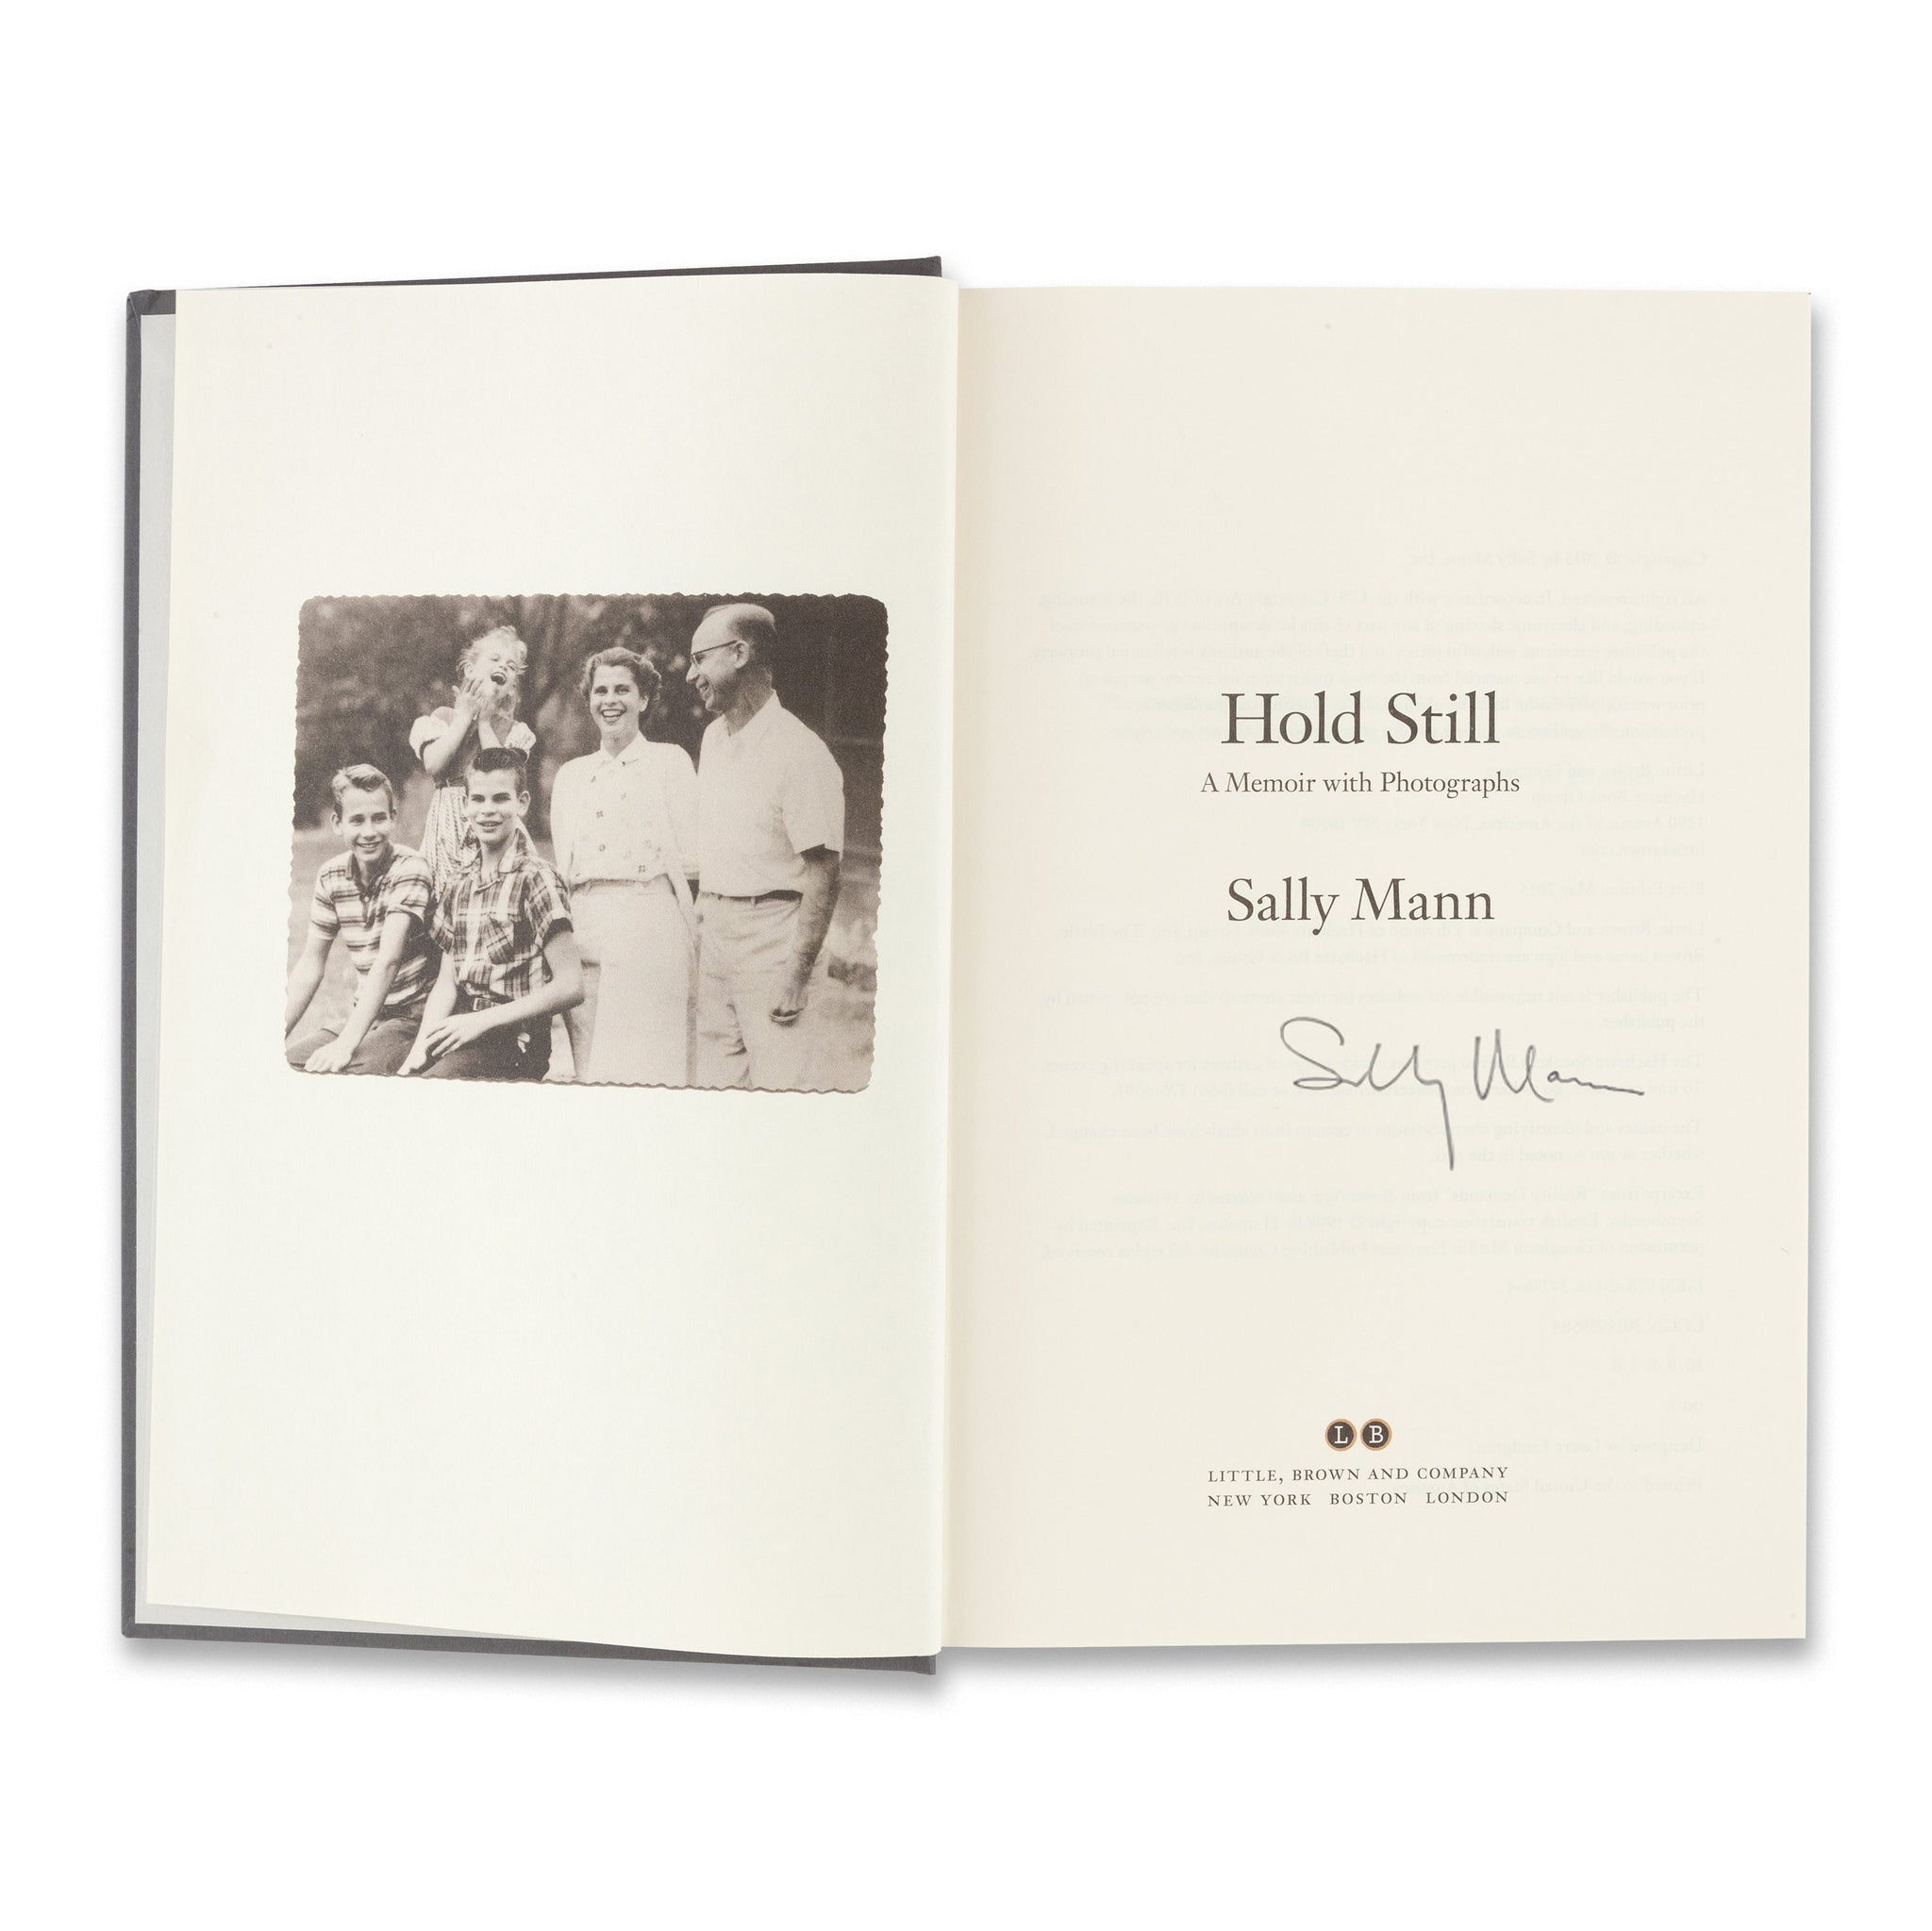 Title page of the book Sally Mann: Hold Still with artist signature